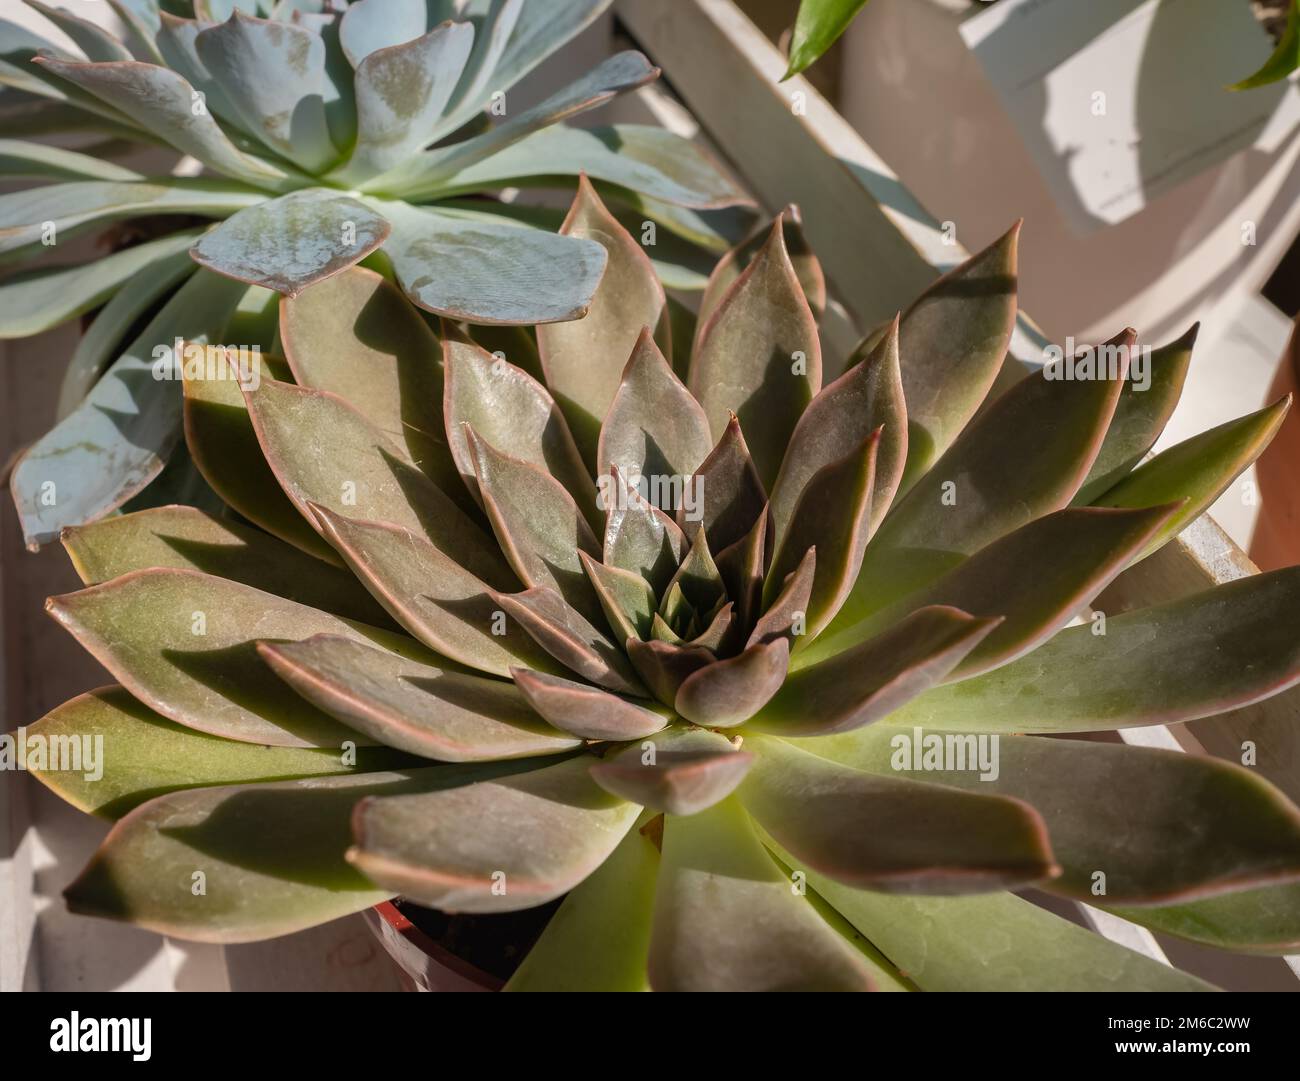 Houseplants in a pot. Close up succulent plants San Francisco river Leatherpetal plant also known as Leather petals. Stock Photo